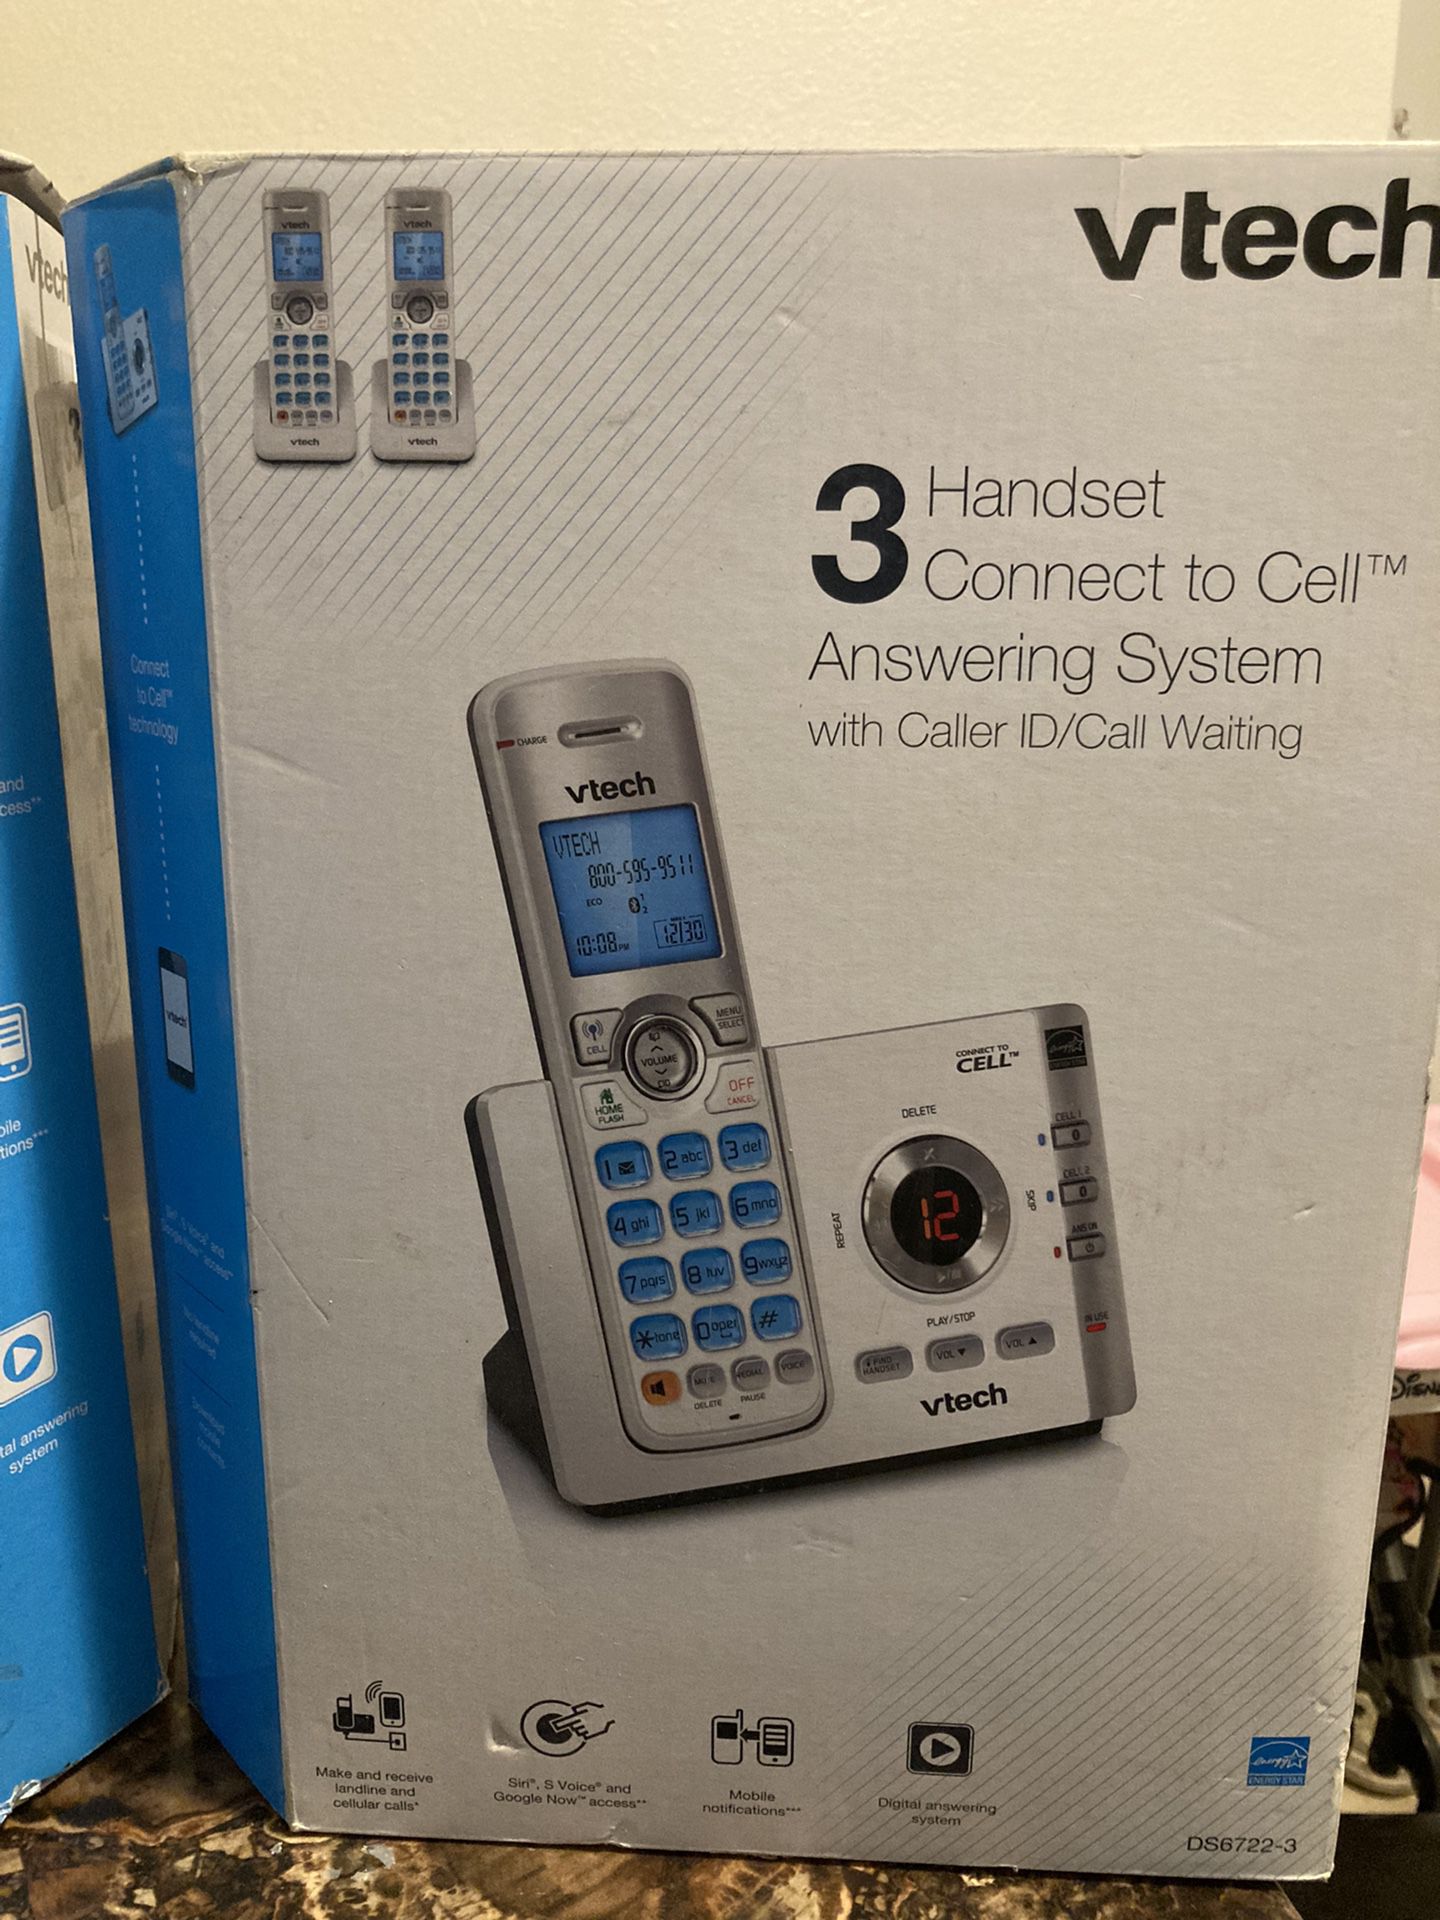 Vtech 3 Handset Connect To Cell Answering System 